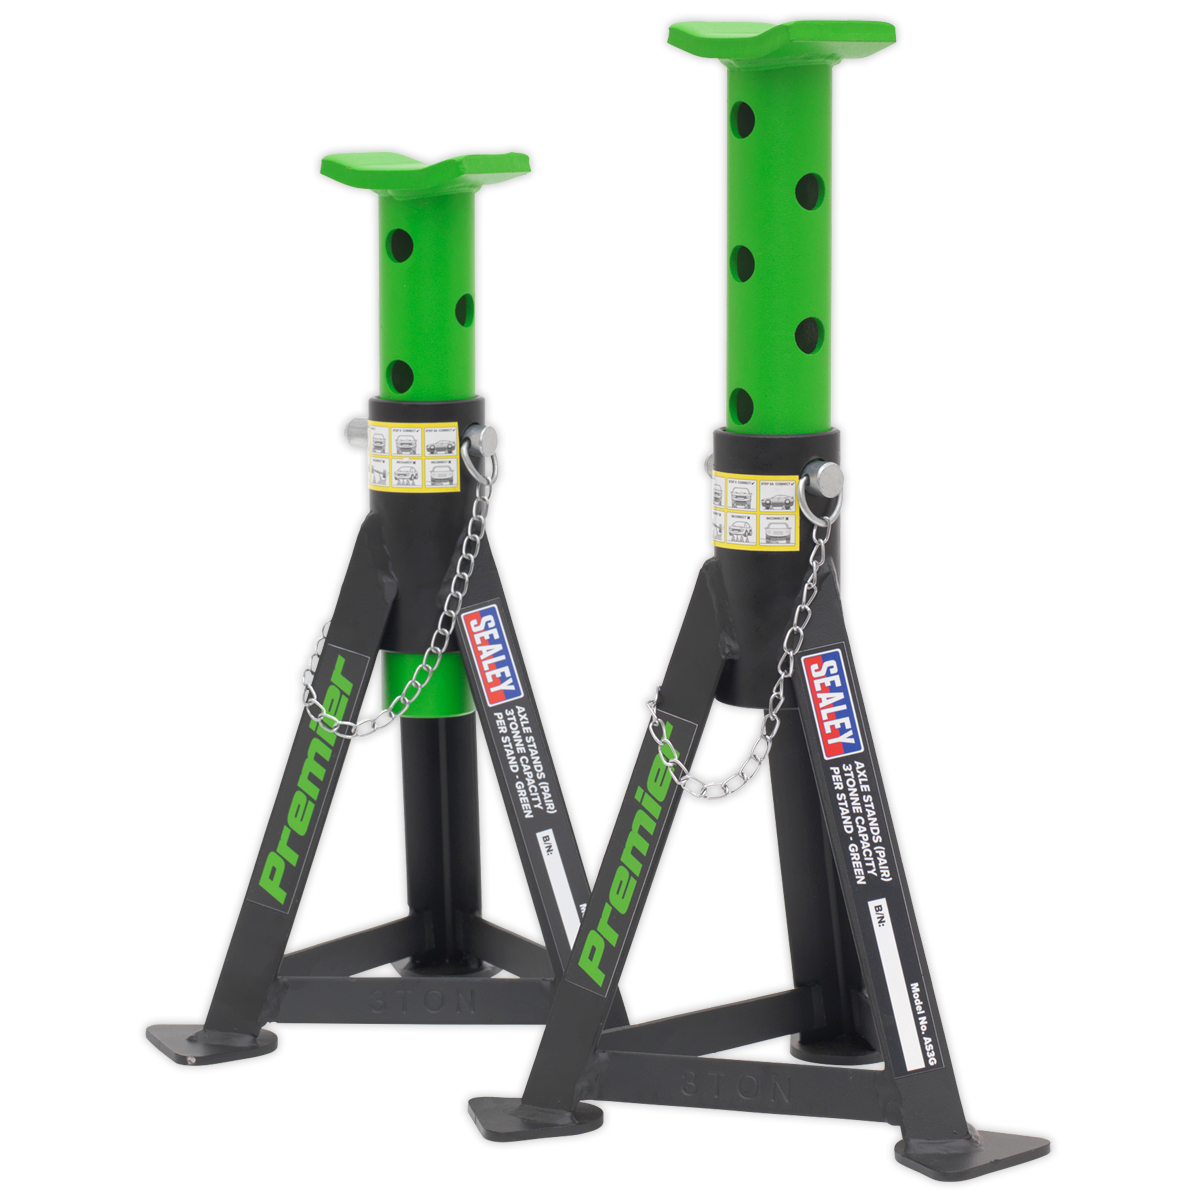 SEALEY - AS3G Axle Stands (Pair) 3tonne Capacity per Stand - Green